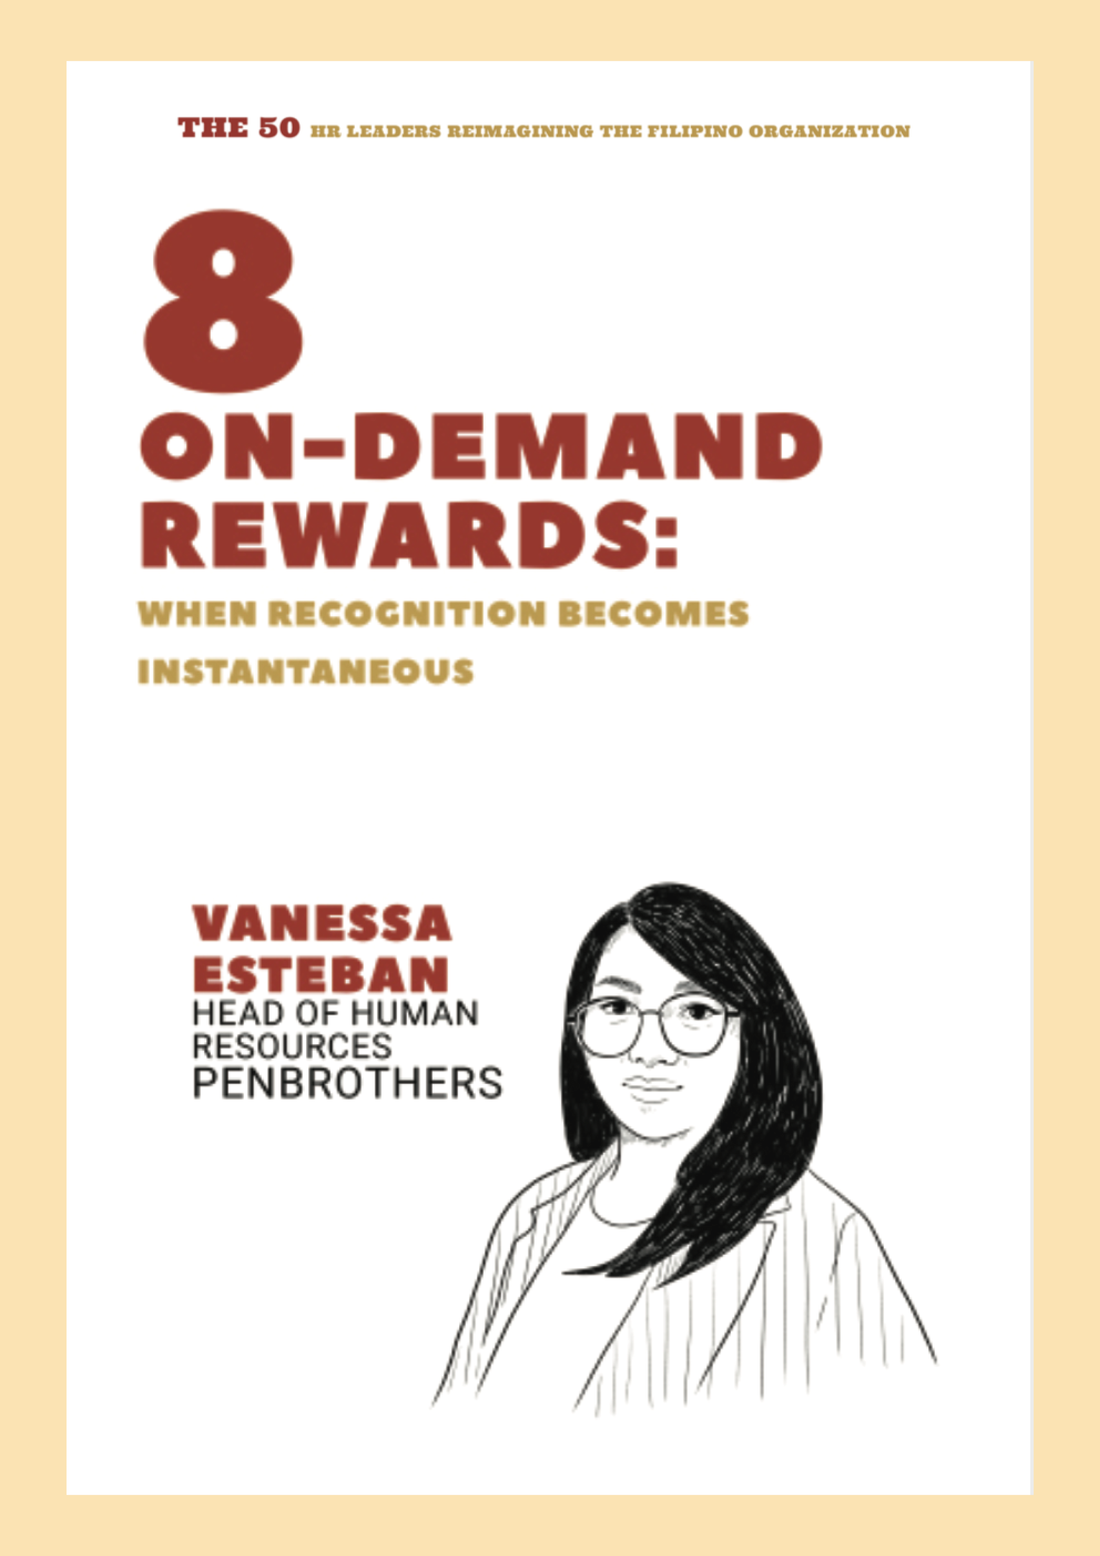 On-Demand Rewards: When Recognition Becomes Instantaneous